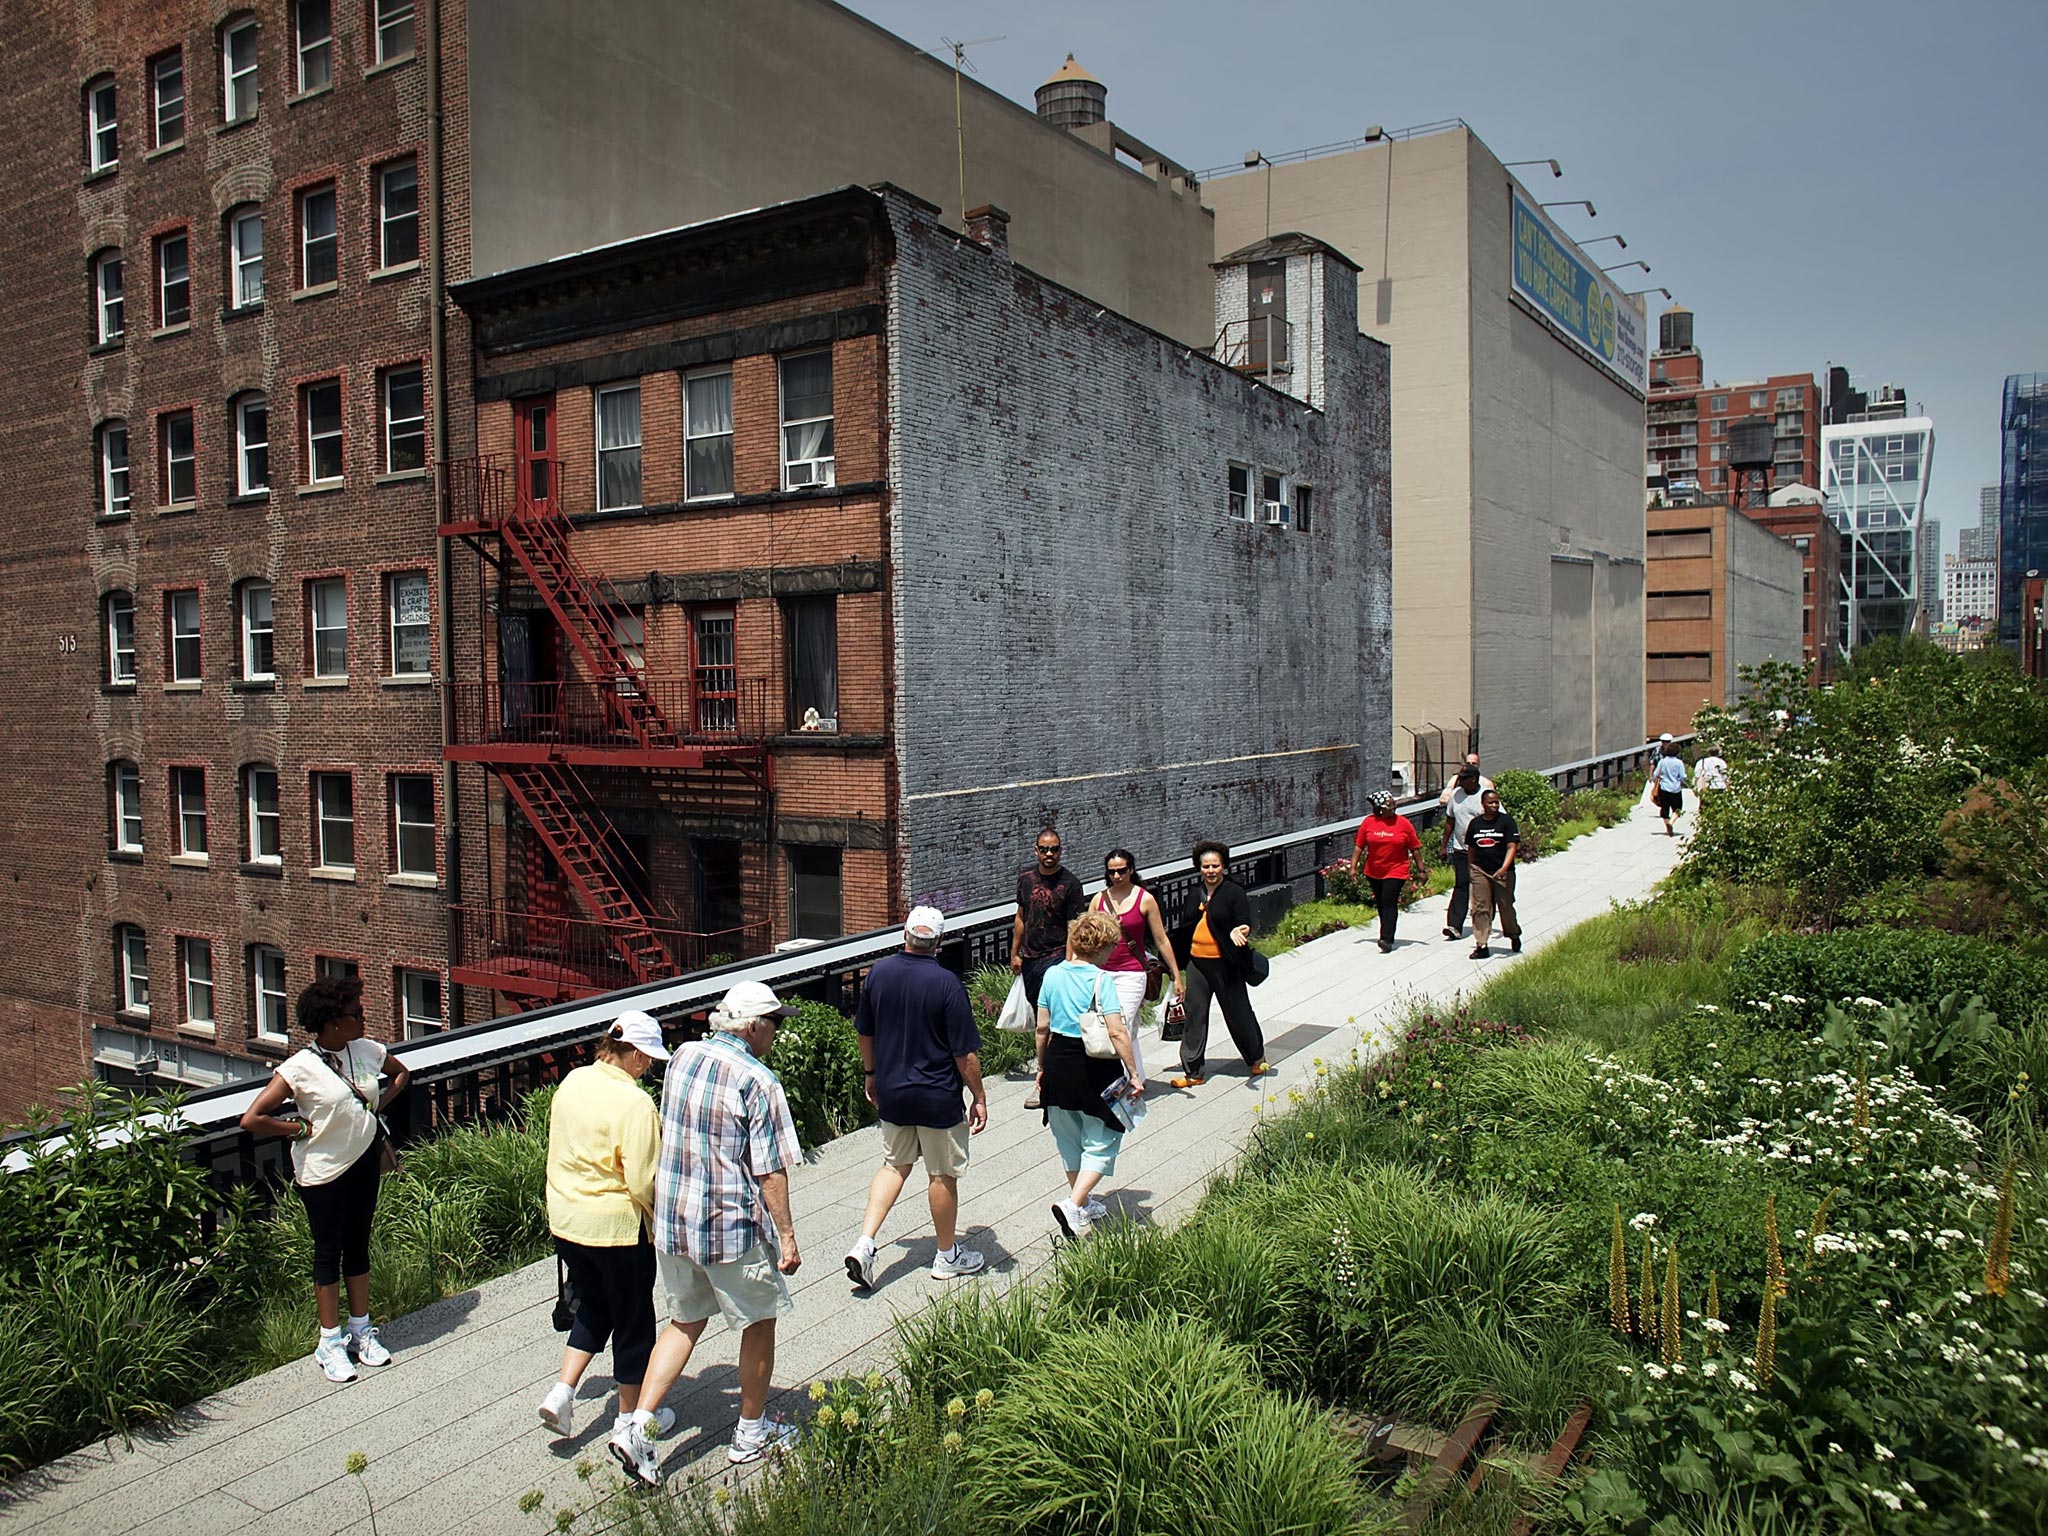 The project has been compared to New York’s High Line